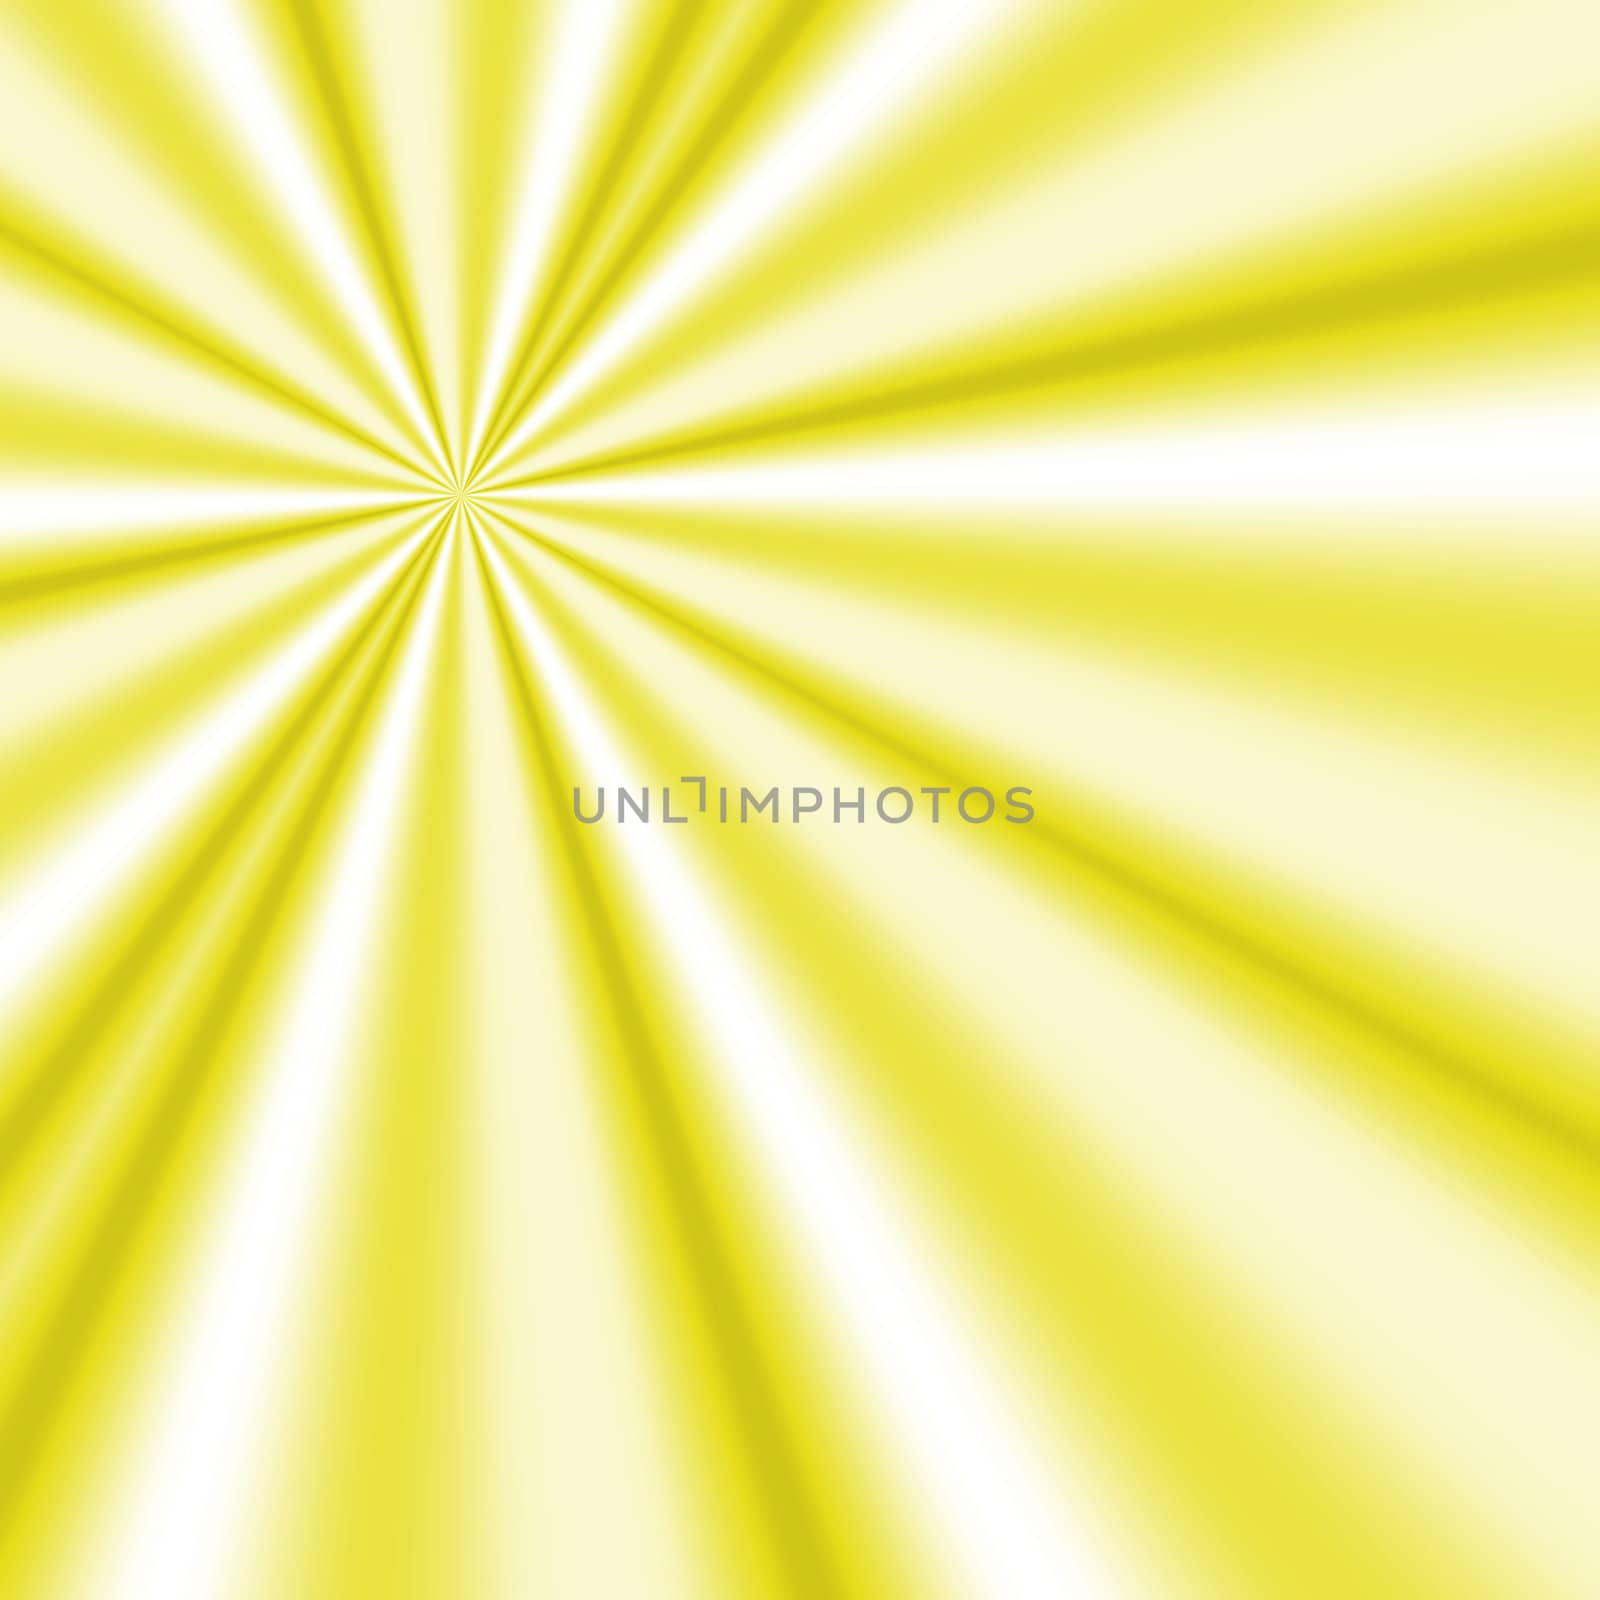 the generated yellow sun rays dissecting space form an abstract background